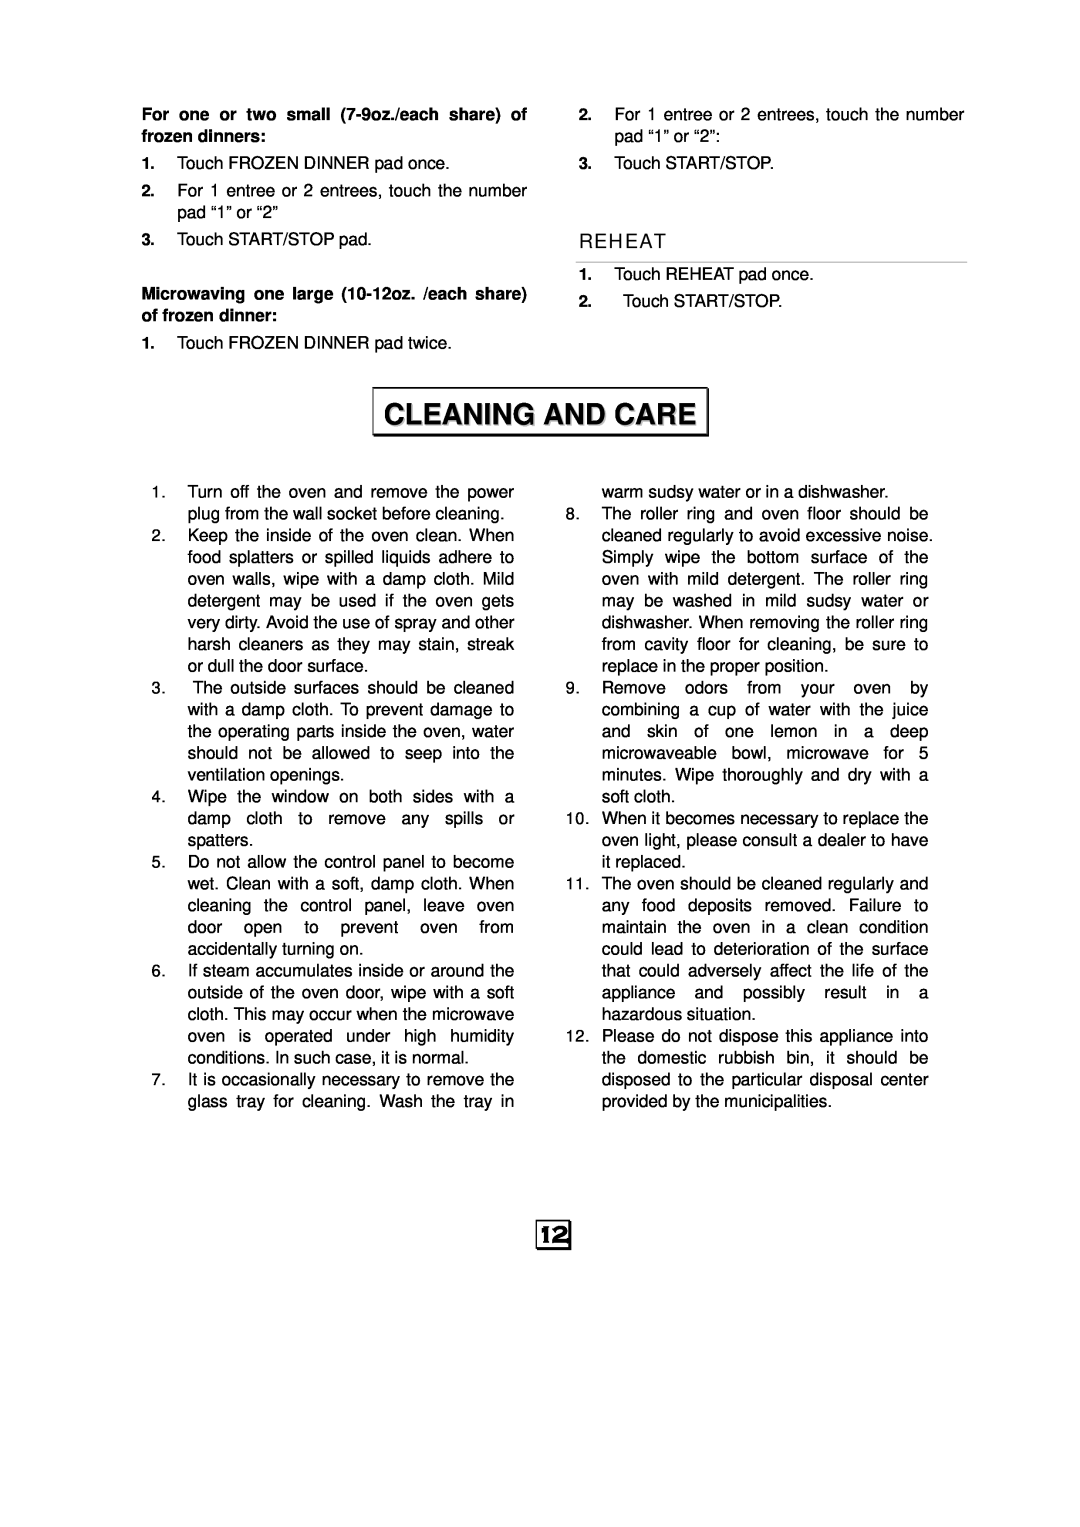 RCA RMW701 warranty Cleaning And Care, Reheat 